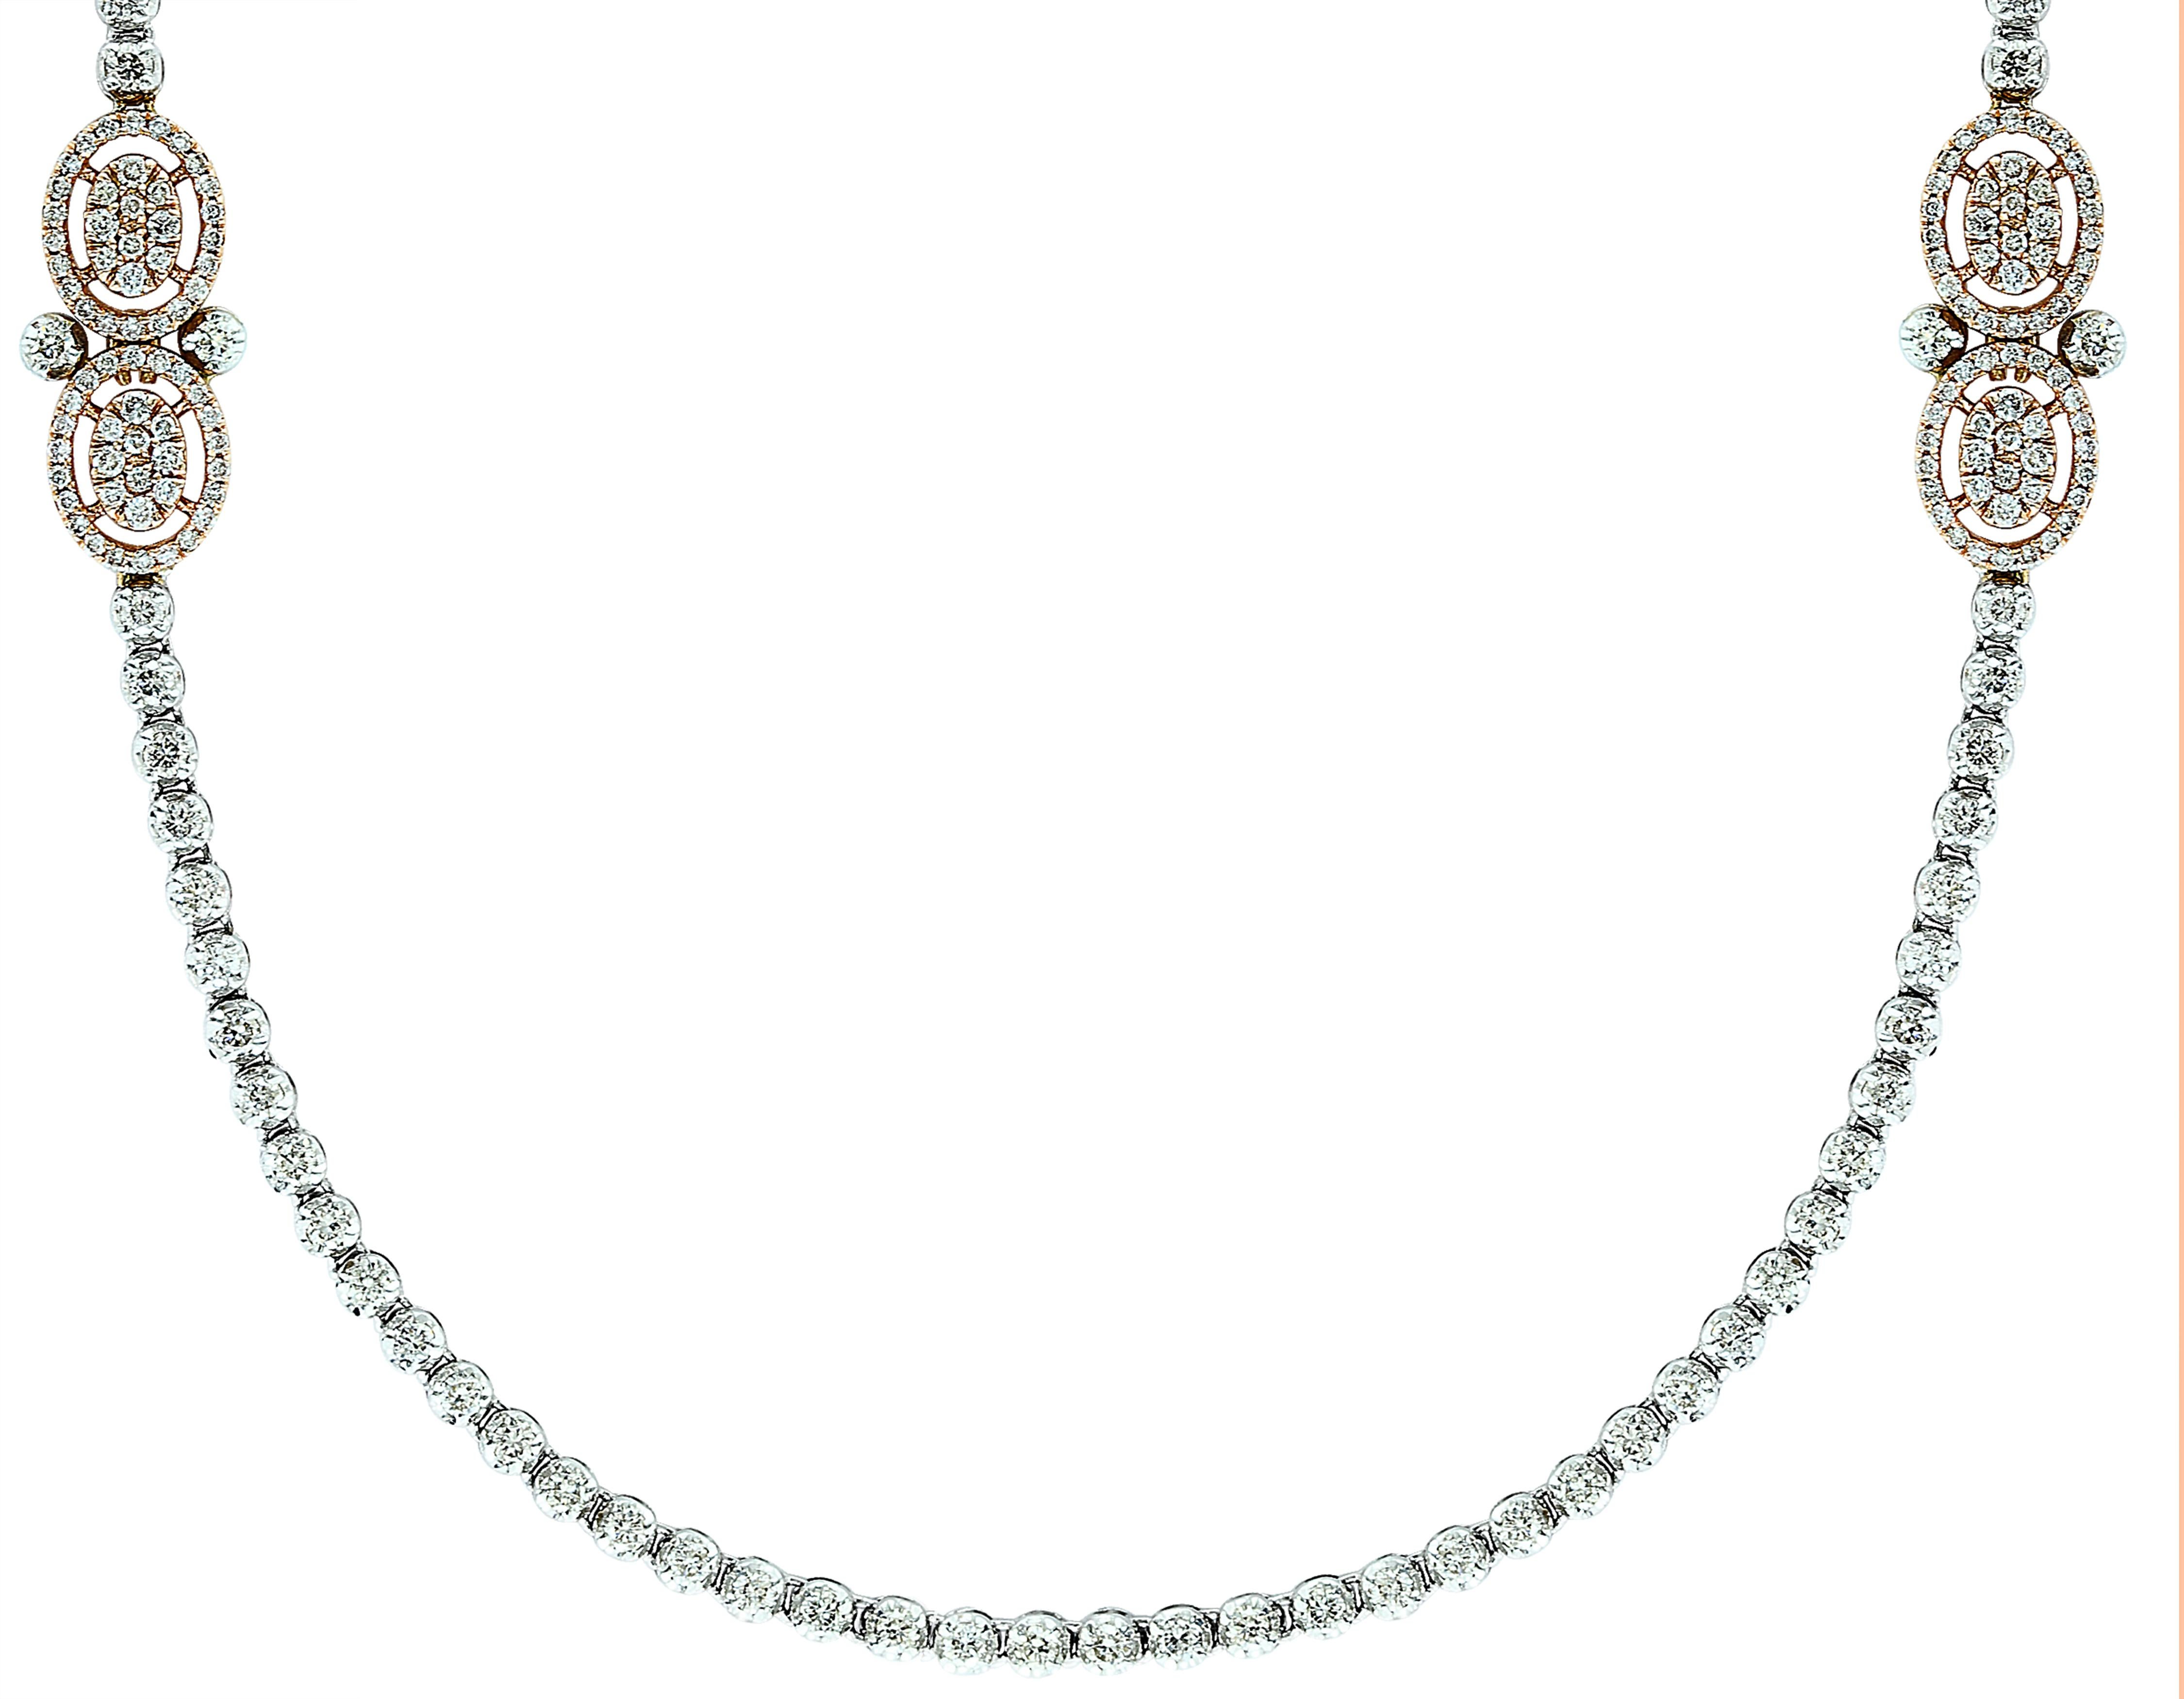 8 Ct Brilliant Cut Diamond Long Necklace in White & Pink 14 K Gold 27 Gm 15